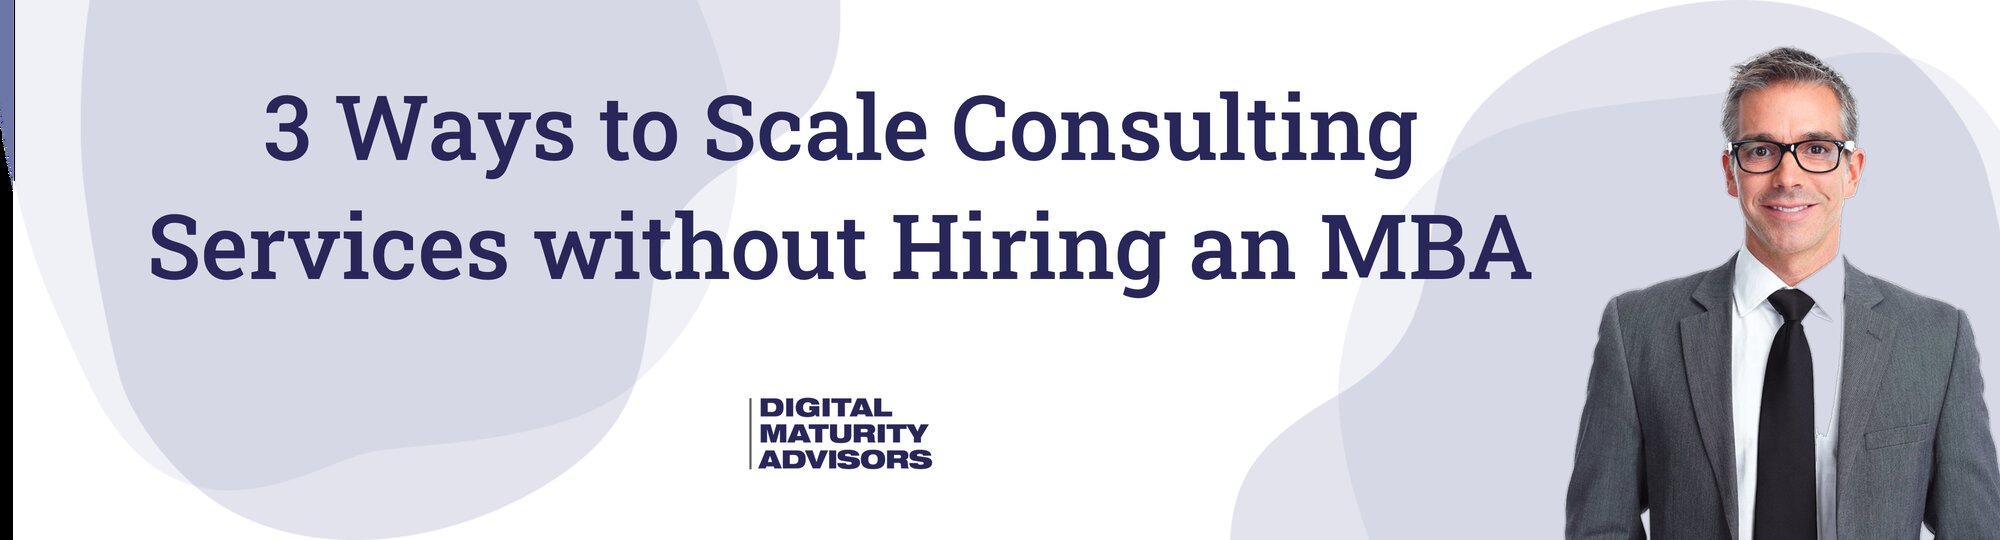 3 Ways to Scale IT Consulting Services without Hiring an MBA